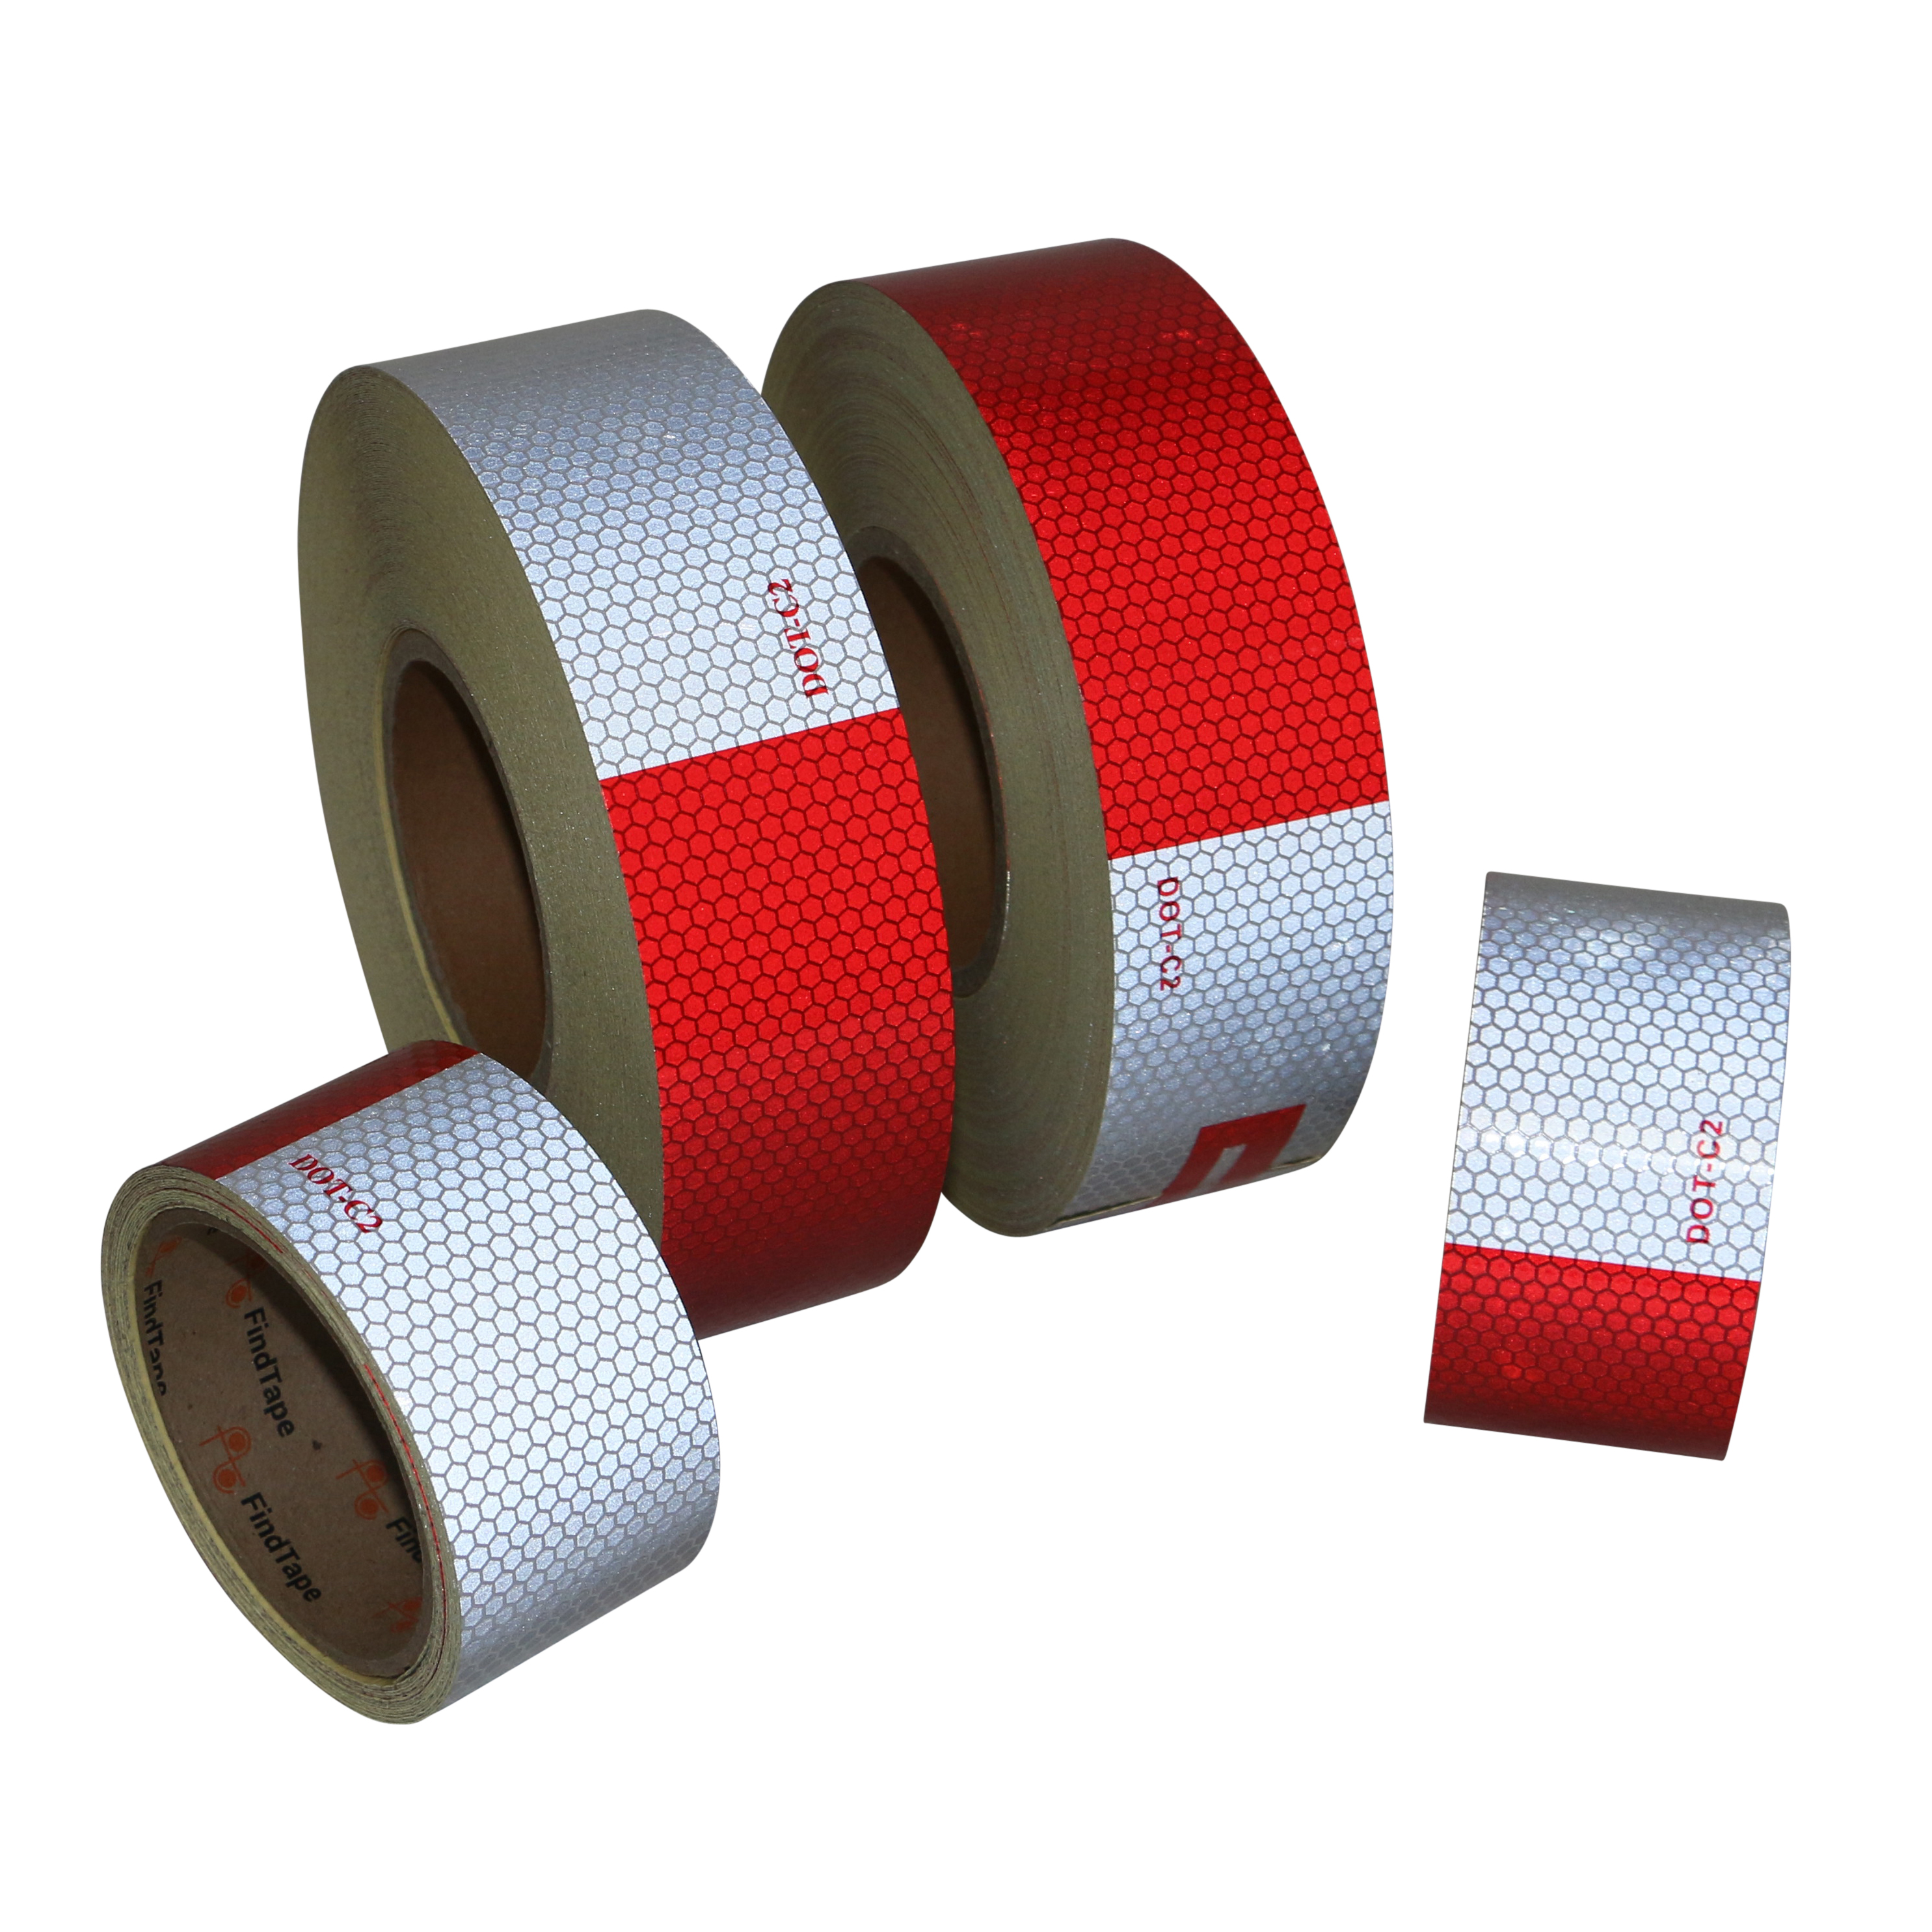 V92 Reflective Safety Tape Trucks Trailers Farm Equipment Vehicles Autos 150 ft 